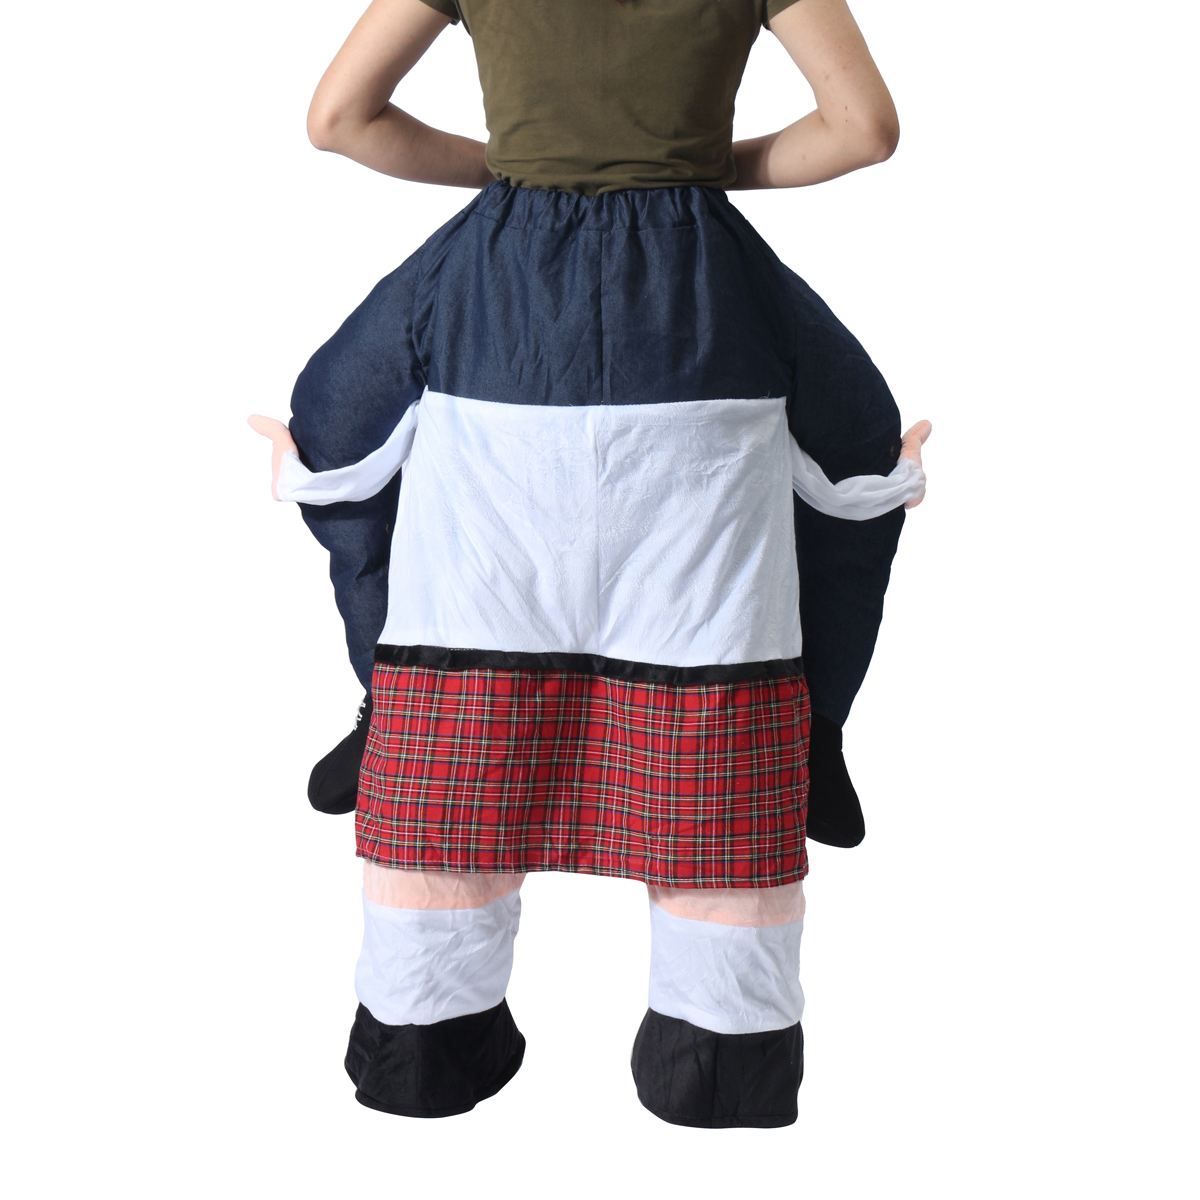 Hallowen-Christmas-Shoulder-Carry-Me-Piggy-Back-Ride-On-Fancy-Dress-Adult-Party-Costume-Outfit-1204091-8